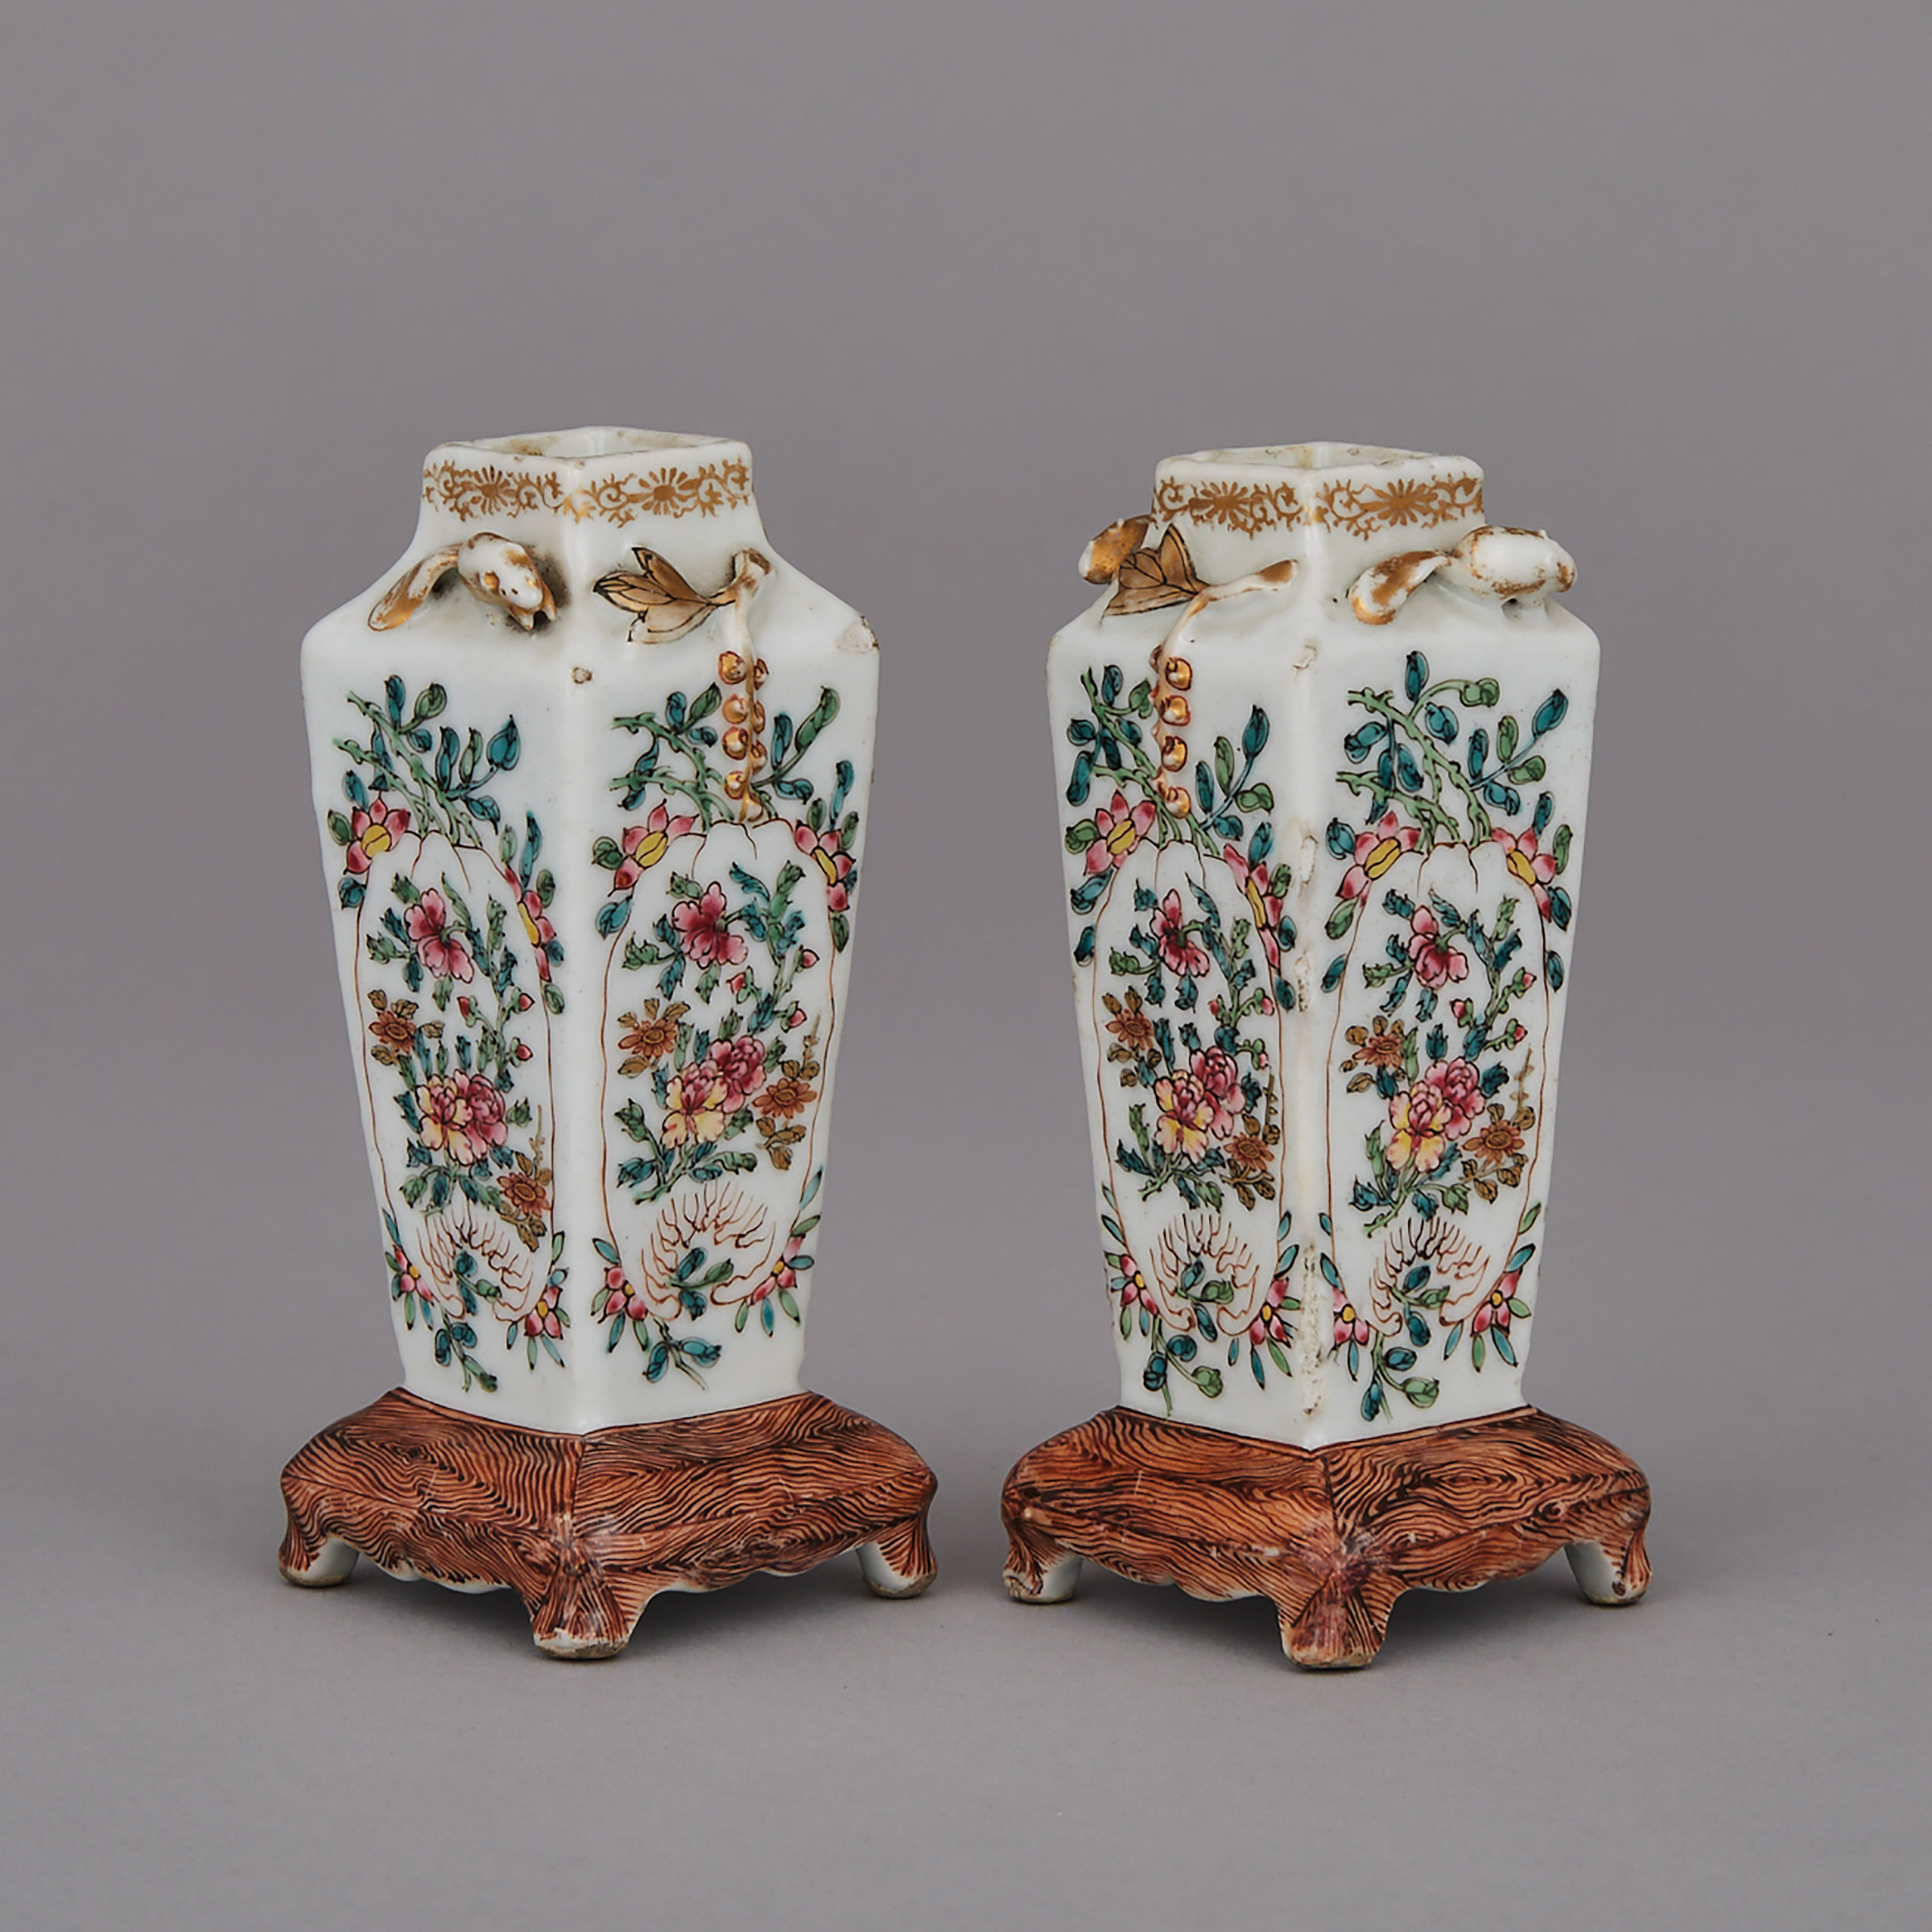 A Pair of Miniature Porcelain Vases with ‘Faux Bois’ Bases, Early 18th Century